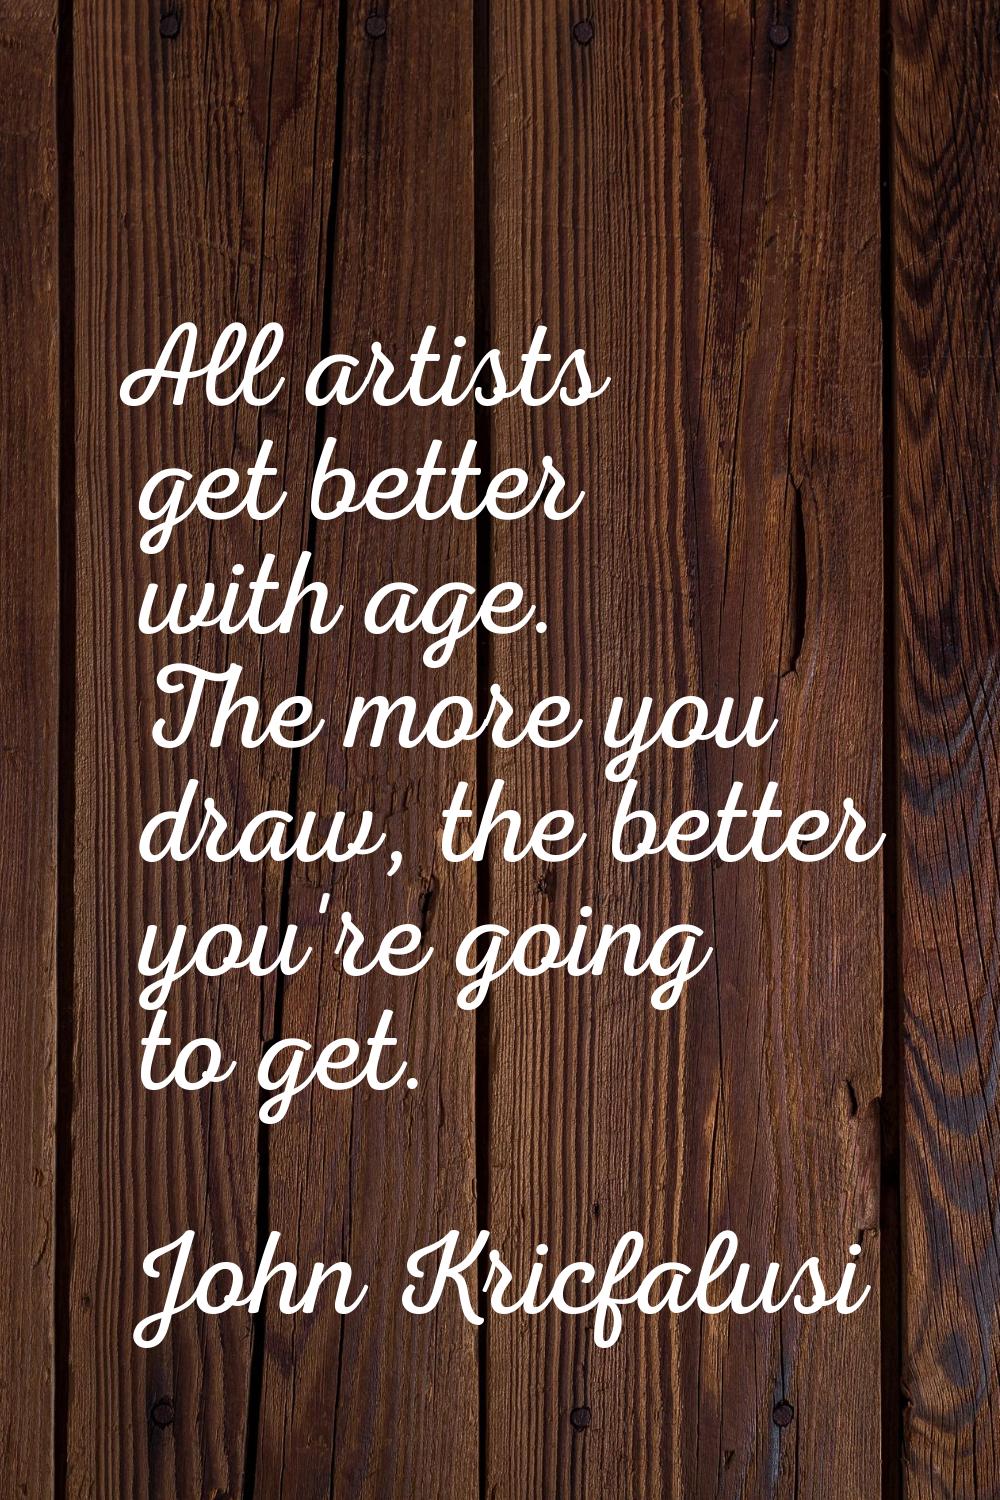 All artists get better with age. The more you draw, the better you're going to get.